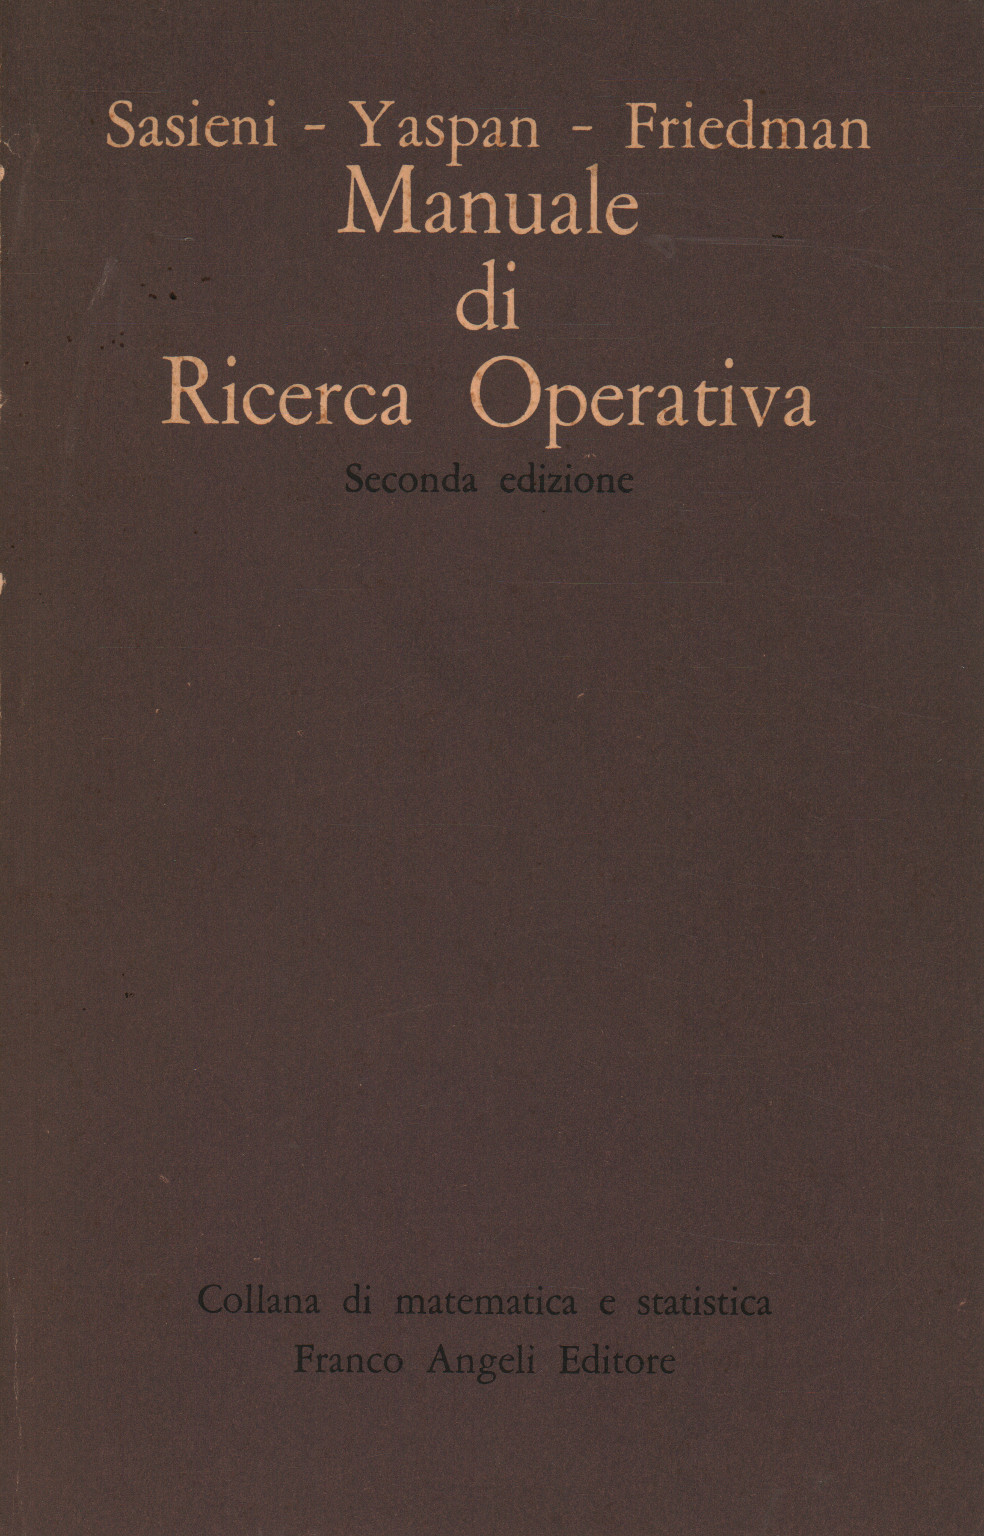 Manual of operation research, s.a.